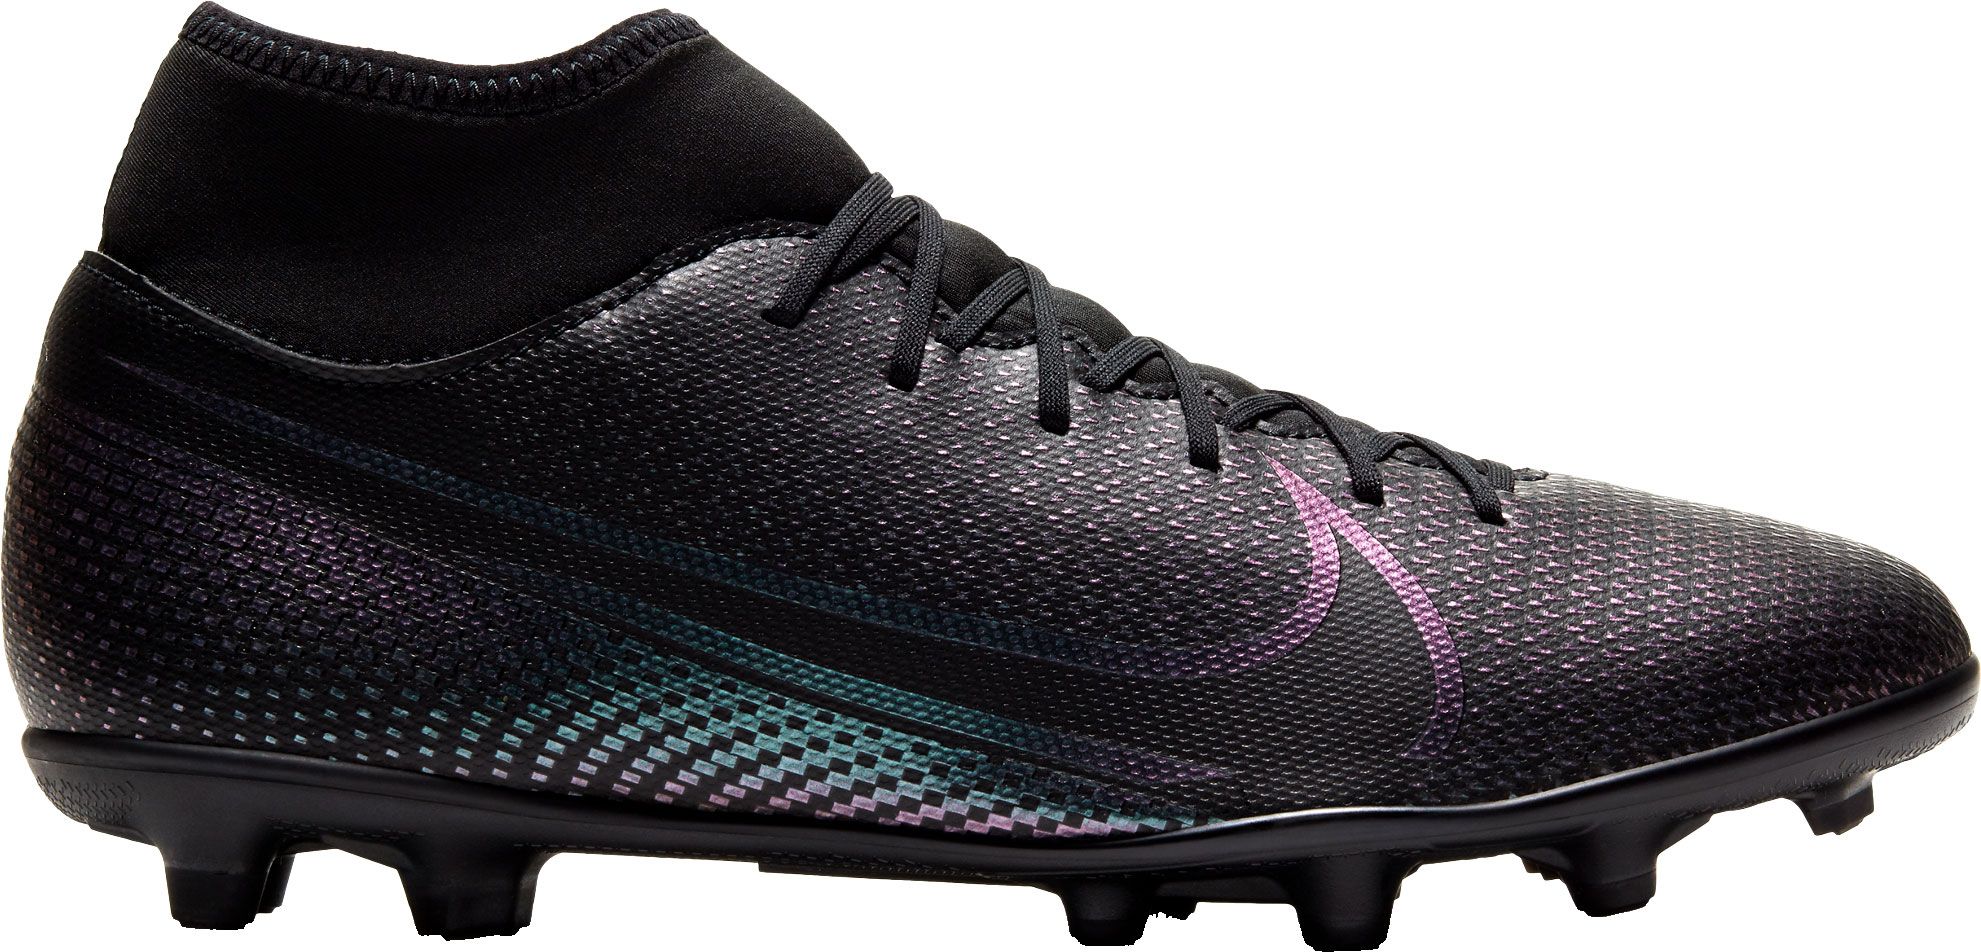 Nike Mercurial Superfly 7 Elite MDS IC Cr7 Size 10 Football.